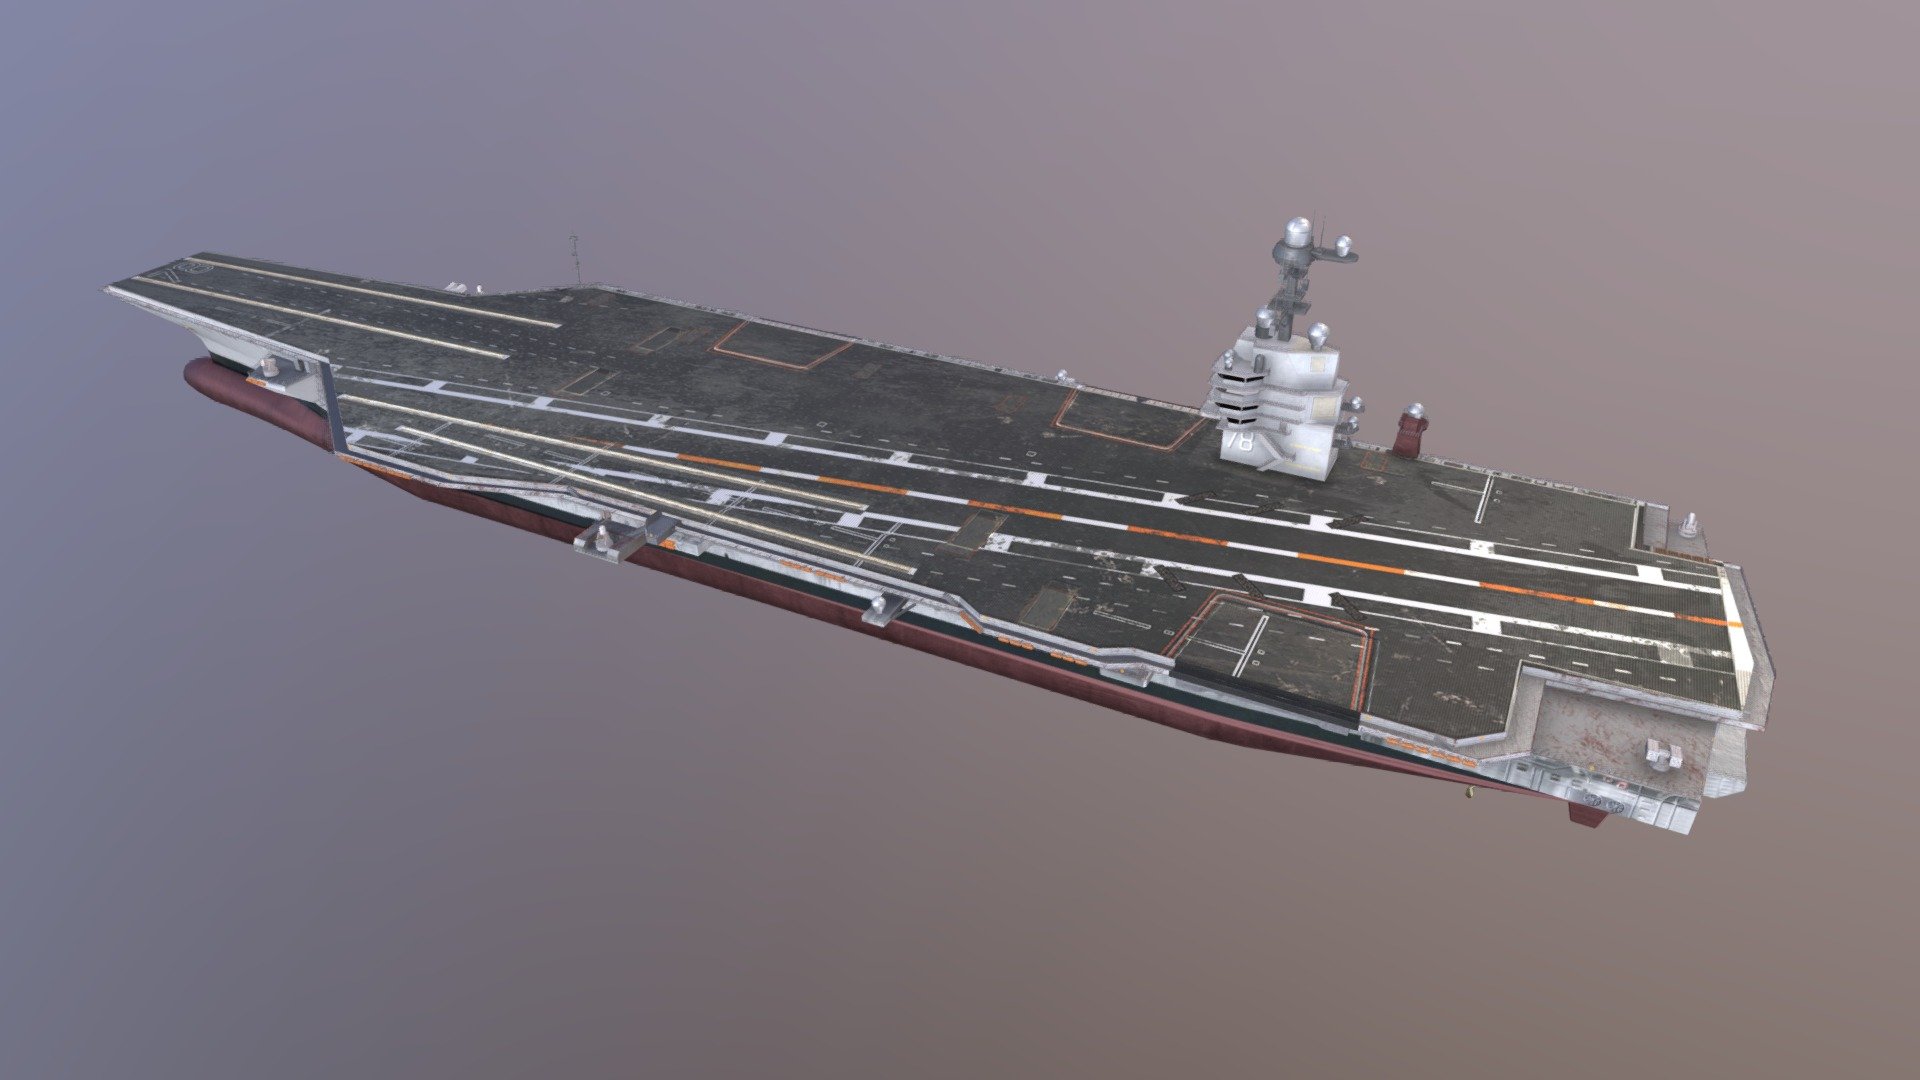 hiiii this is the gerald R ford super carrier! been working on this for quite a while now! please enjoy it! dont forget a shoutout when u use it xD~ &lt;3

-fully rigged! (better use that blend file to avoid FBX nonsense!)
-explorable interiors
-optimized to be a vehicle or a map!
-working weapon systems!
-working propellers and elevators and blast deflectors!

got a lot of space to add props and assets but i decided to publish it like this so u can add your own stuff to it!

rar file contains renders for better inspection and carrier explorable sections (a map!) 

modeled using maya, textured using substance painter, UVd and rigged and put together using blender! - Gerald R Ford aircraft Carrier - Download Free 3D model by waelXcm 3d model